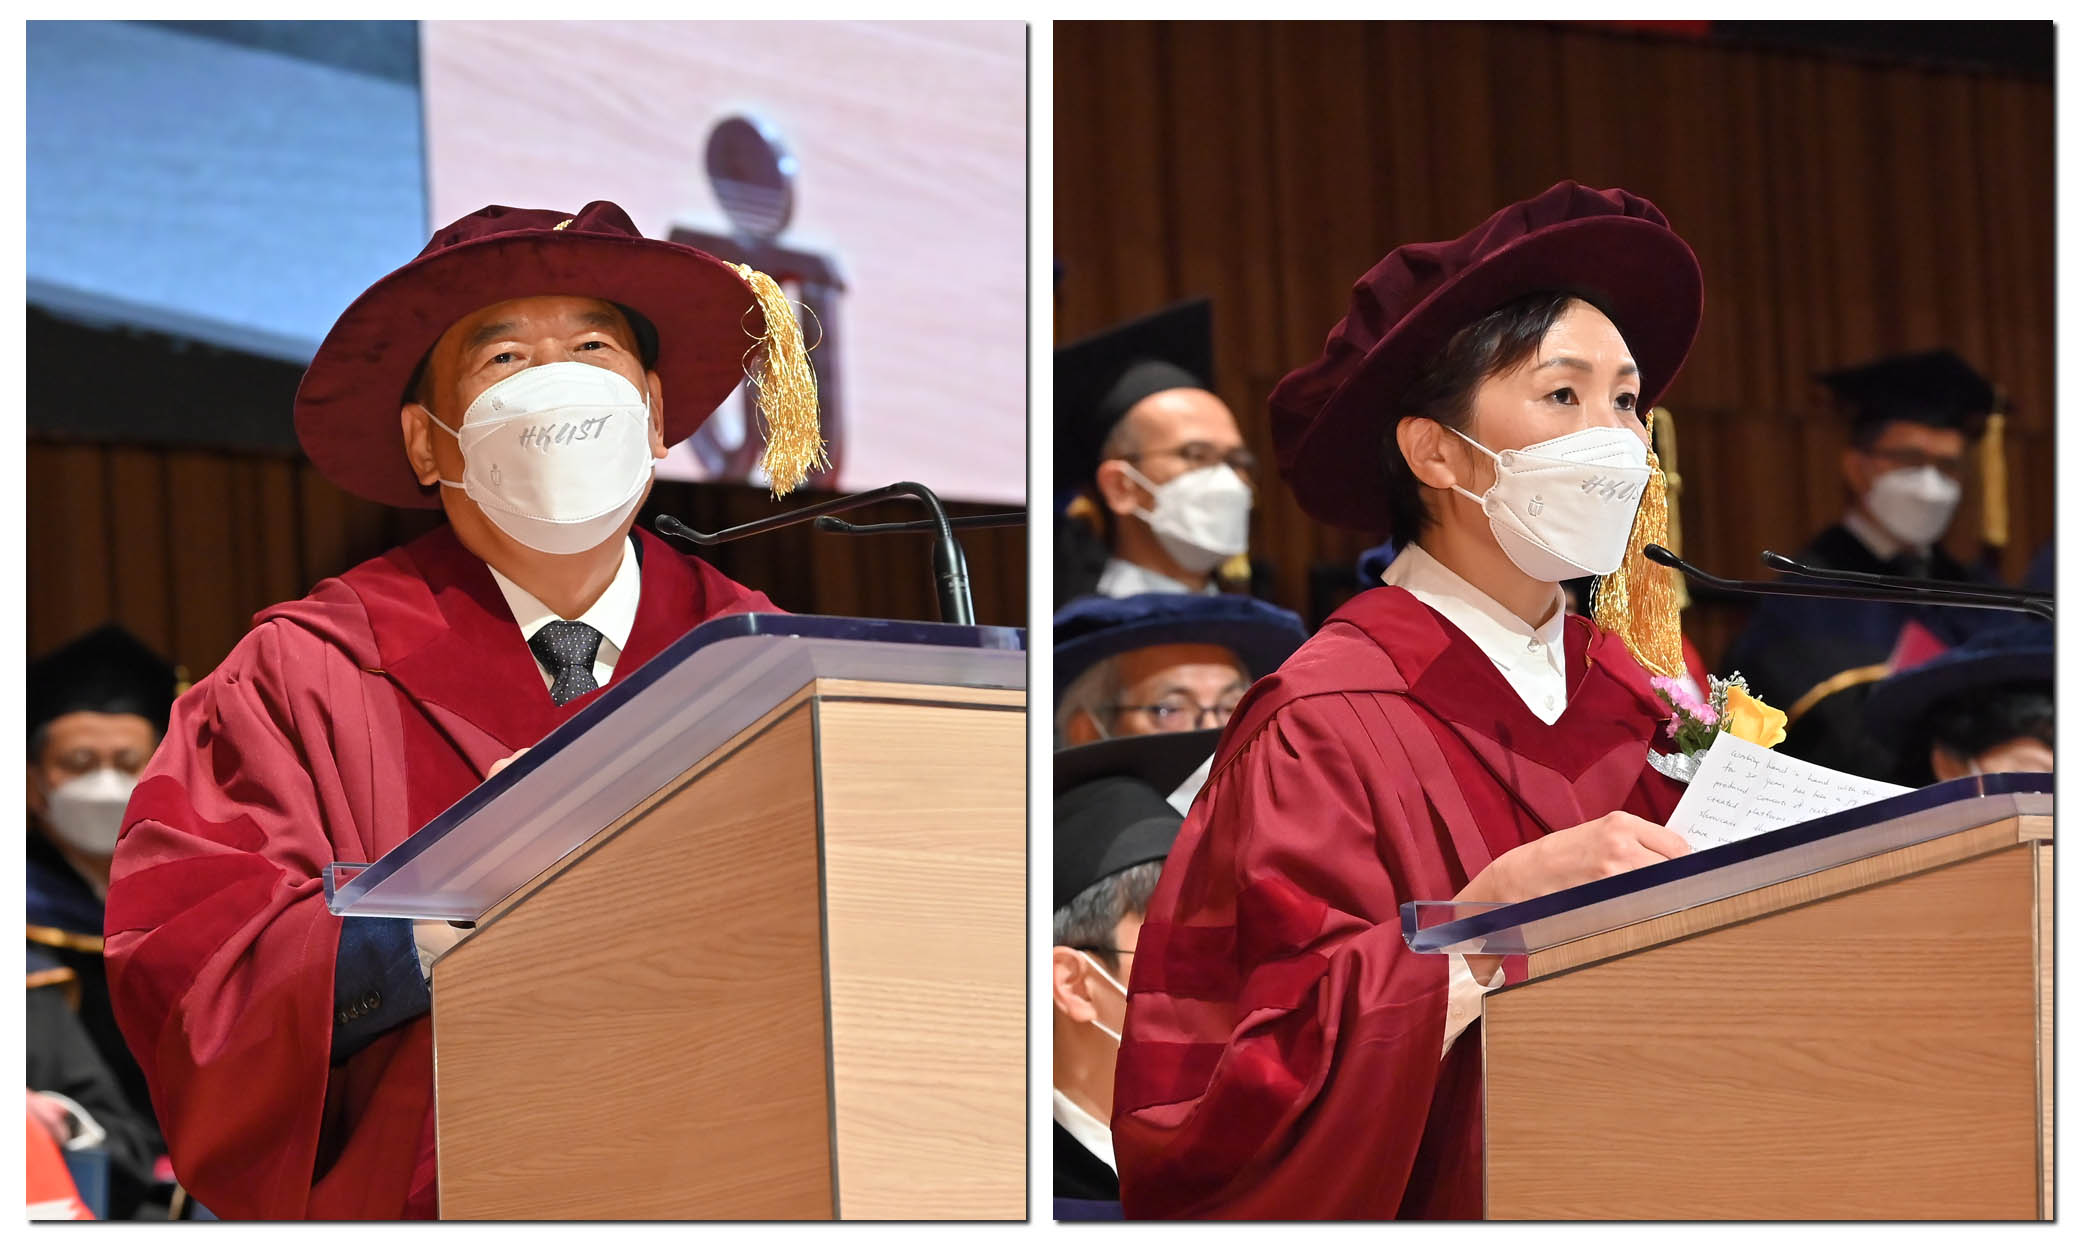 (From left) The two Honorary Doctorate recipients Dr. WANG Xiaodong and Ms. YIP Wing-Sie address the ceremony